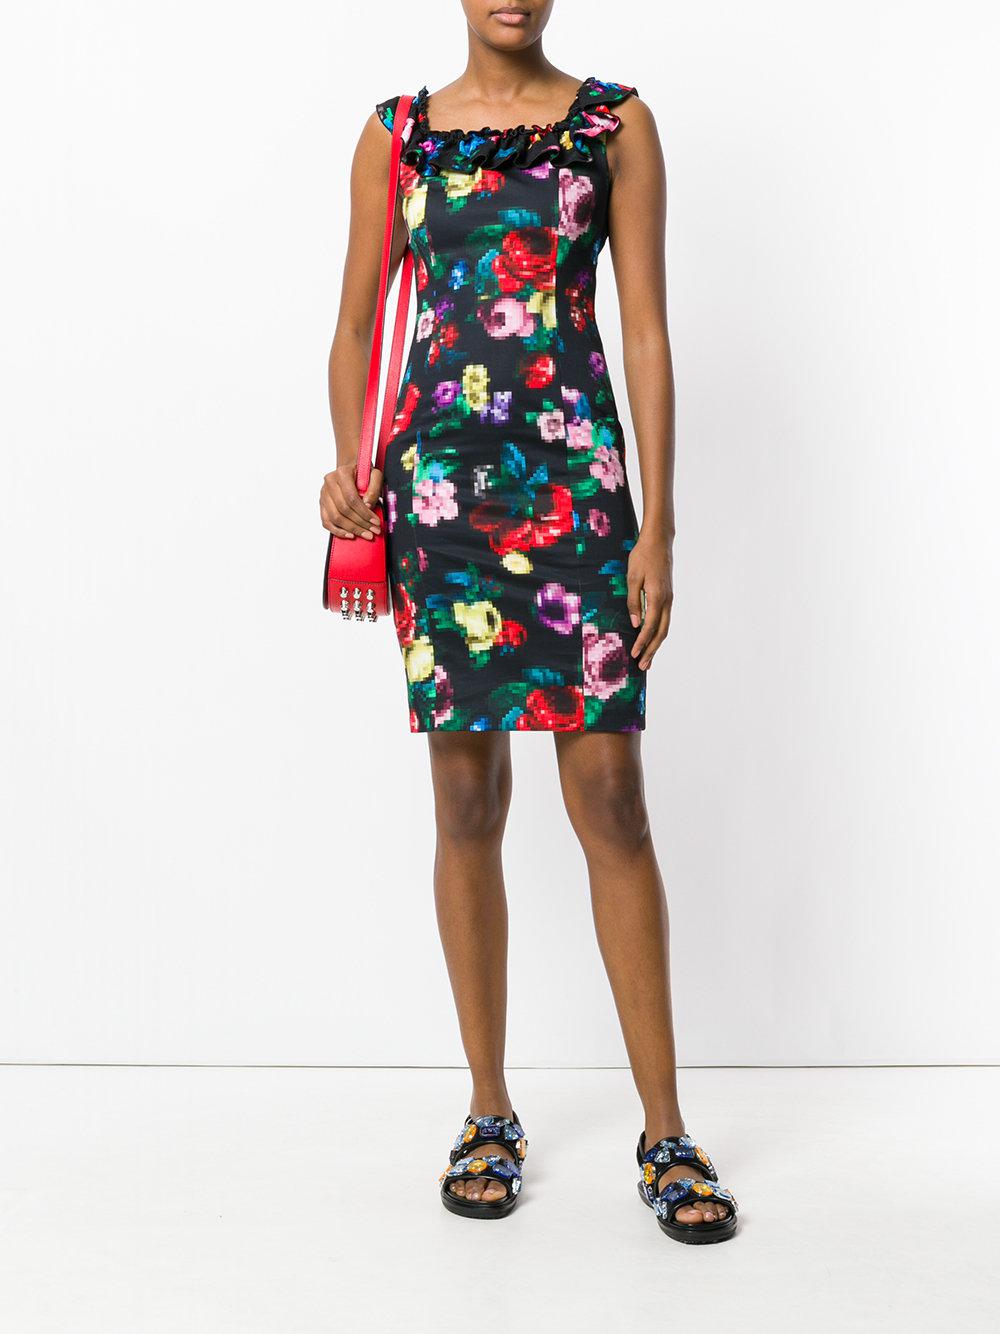 Lyst - Love Moschino Pixilated Flower Dress in Black